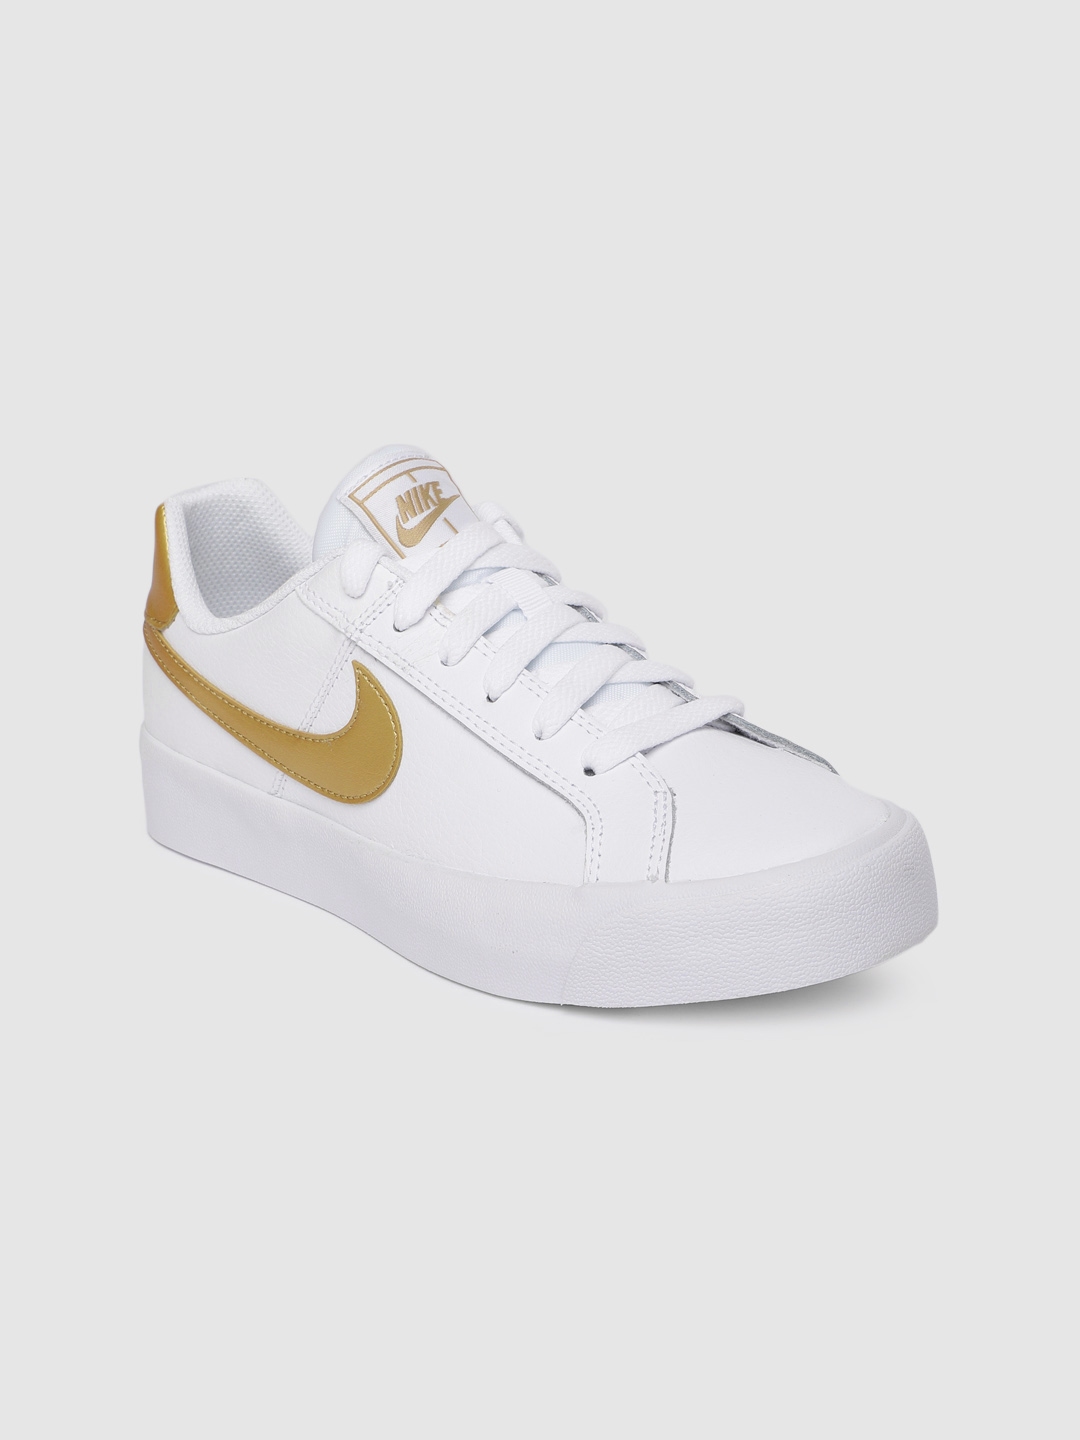 Buy Nike White Court AC Leather Tennis - Sports Shoes for Women 10714456 | Myntra